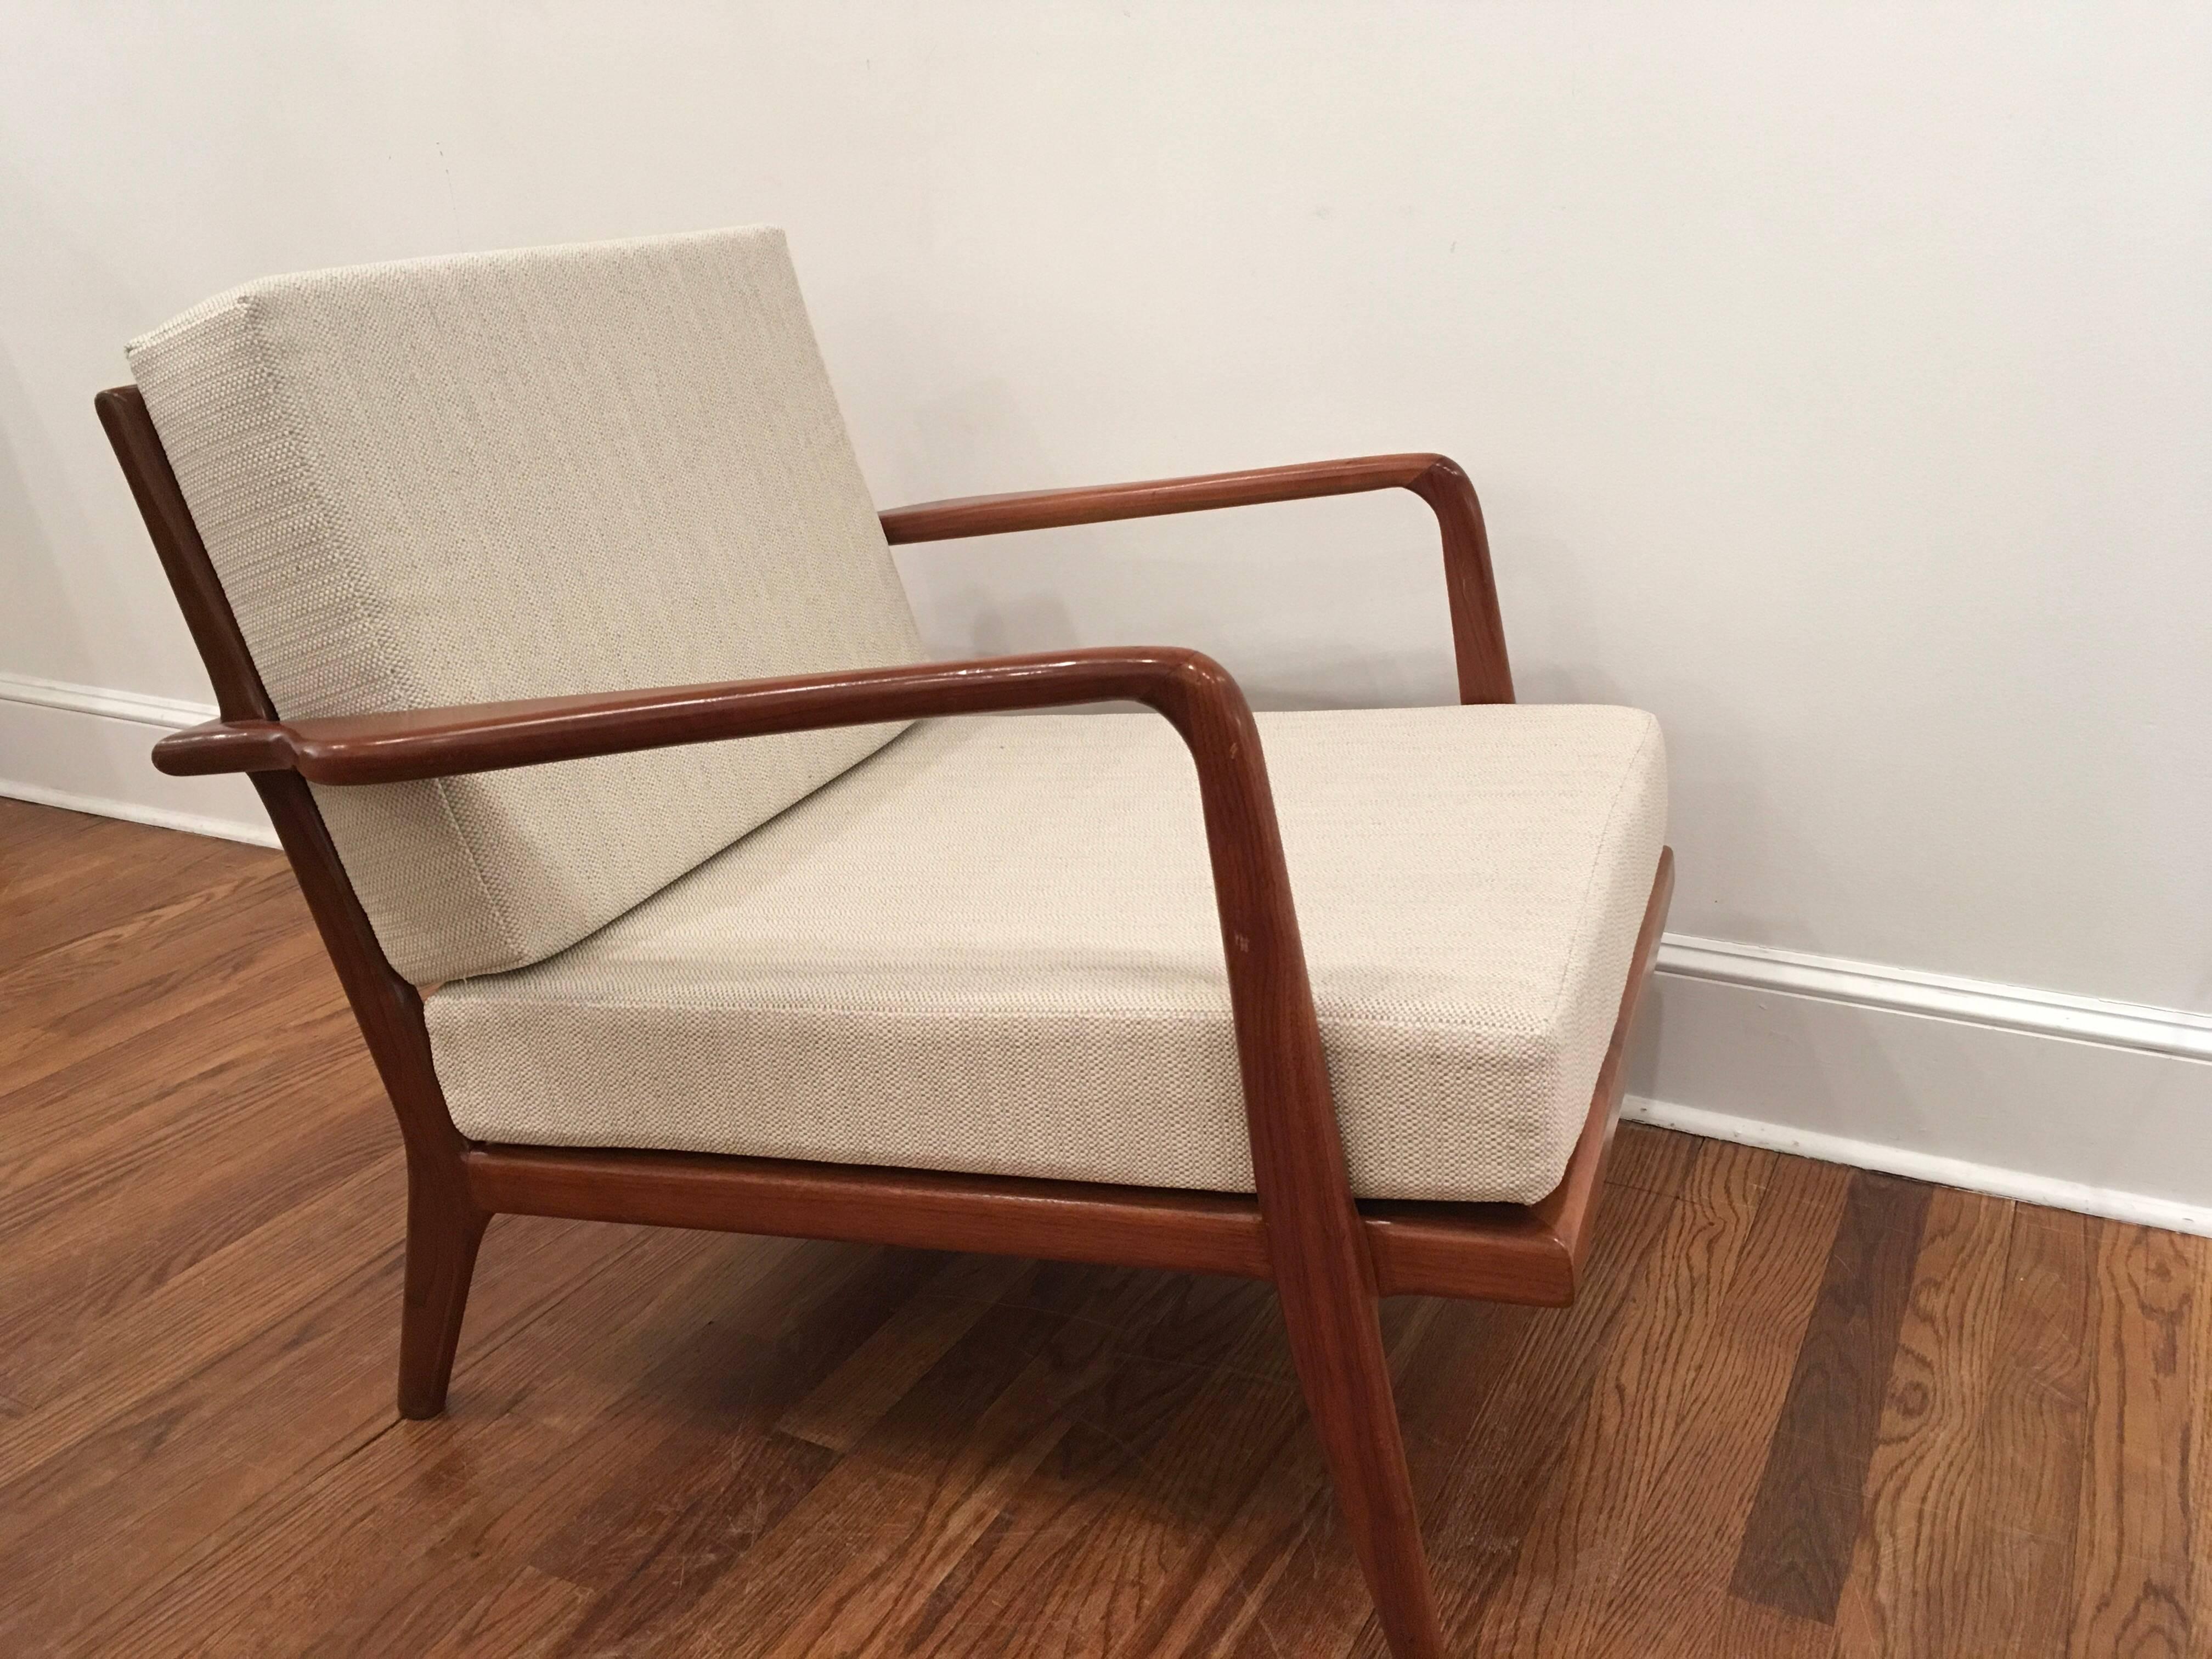 Pair of 1960s walnut armchairs designed by Mel Smilow. Recently reupholstered, the armchairs are deep and very comfortable. They are beautifully crafted and are stunning from every angle.